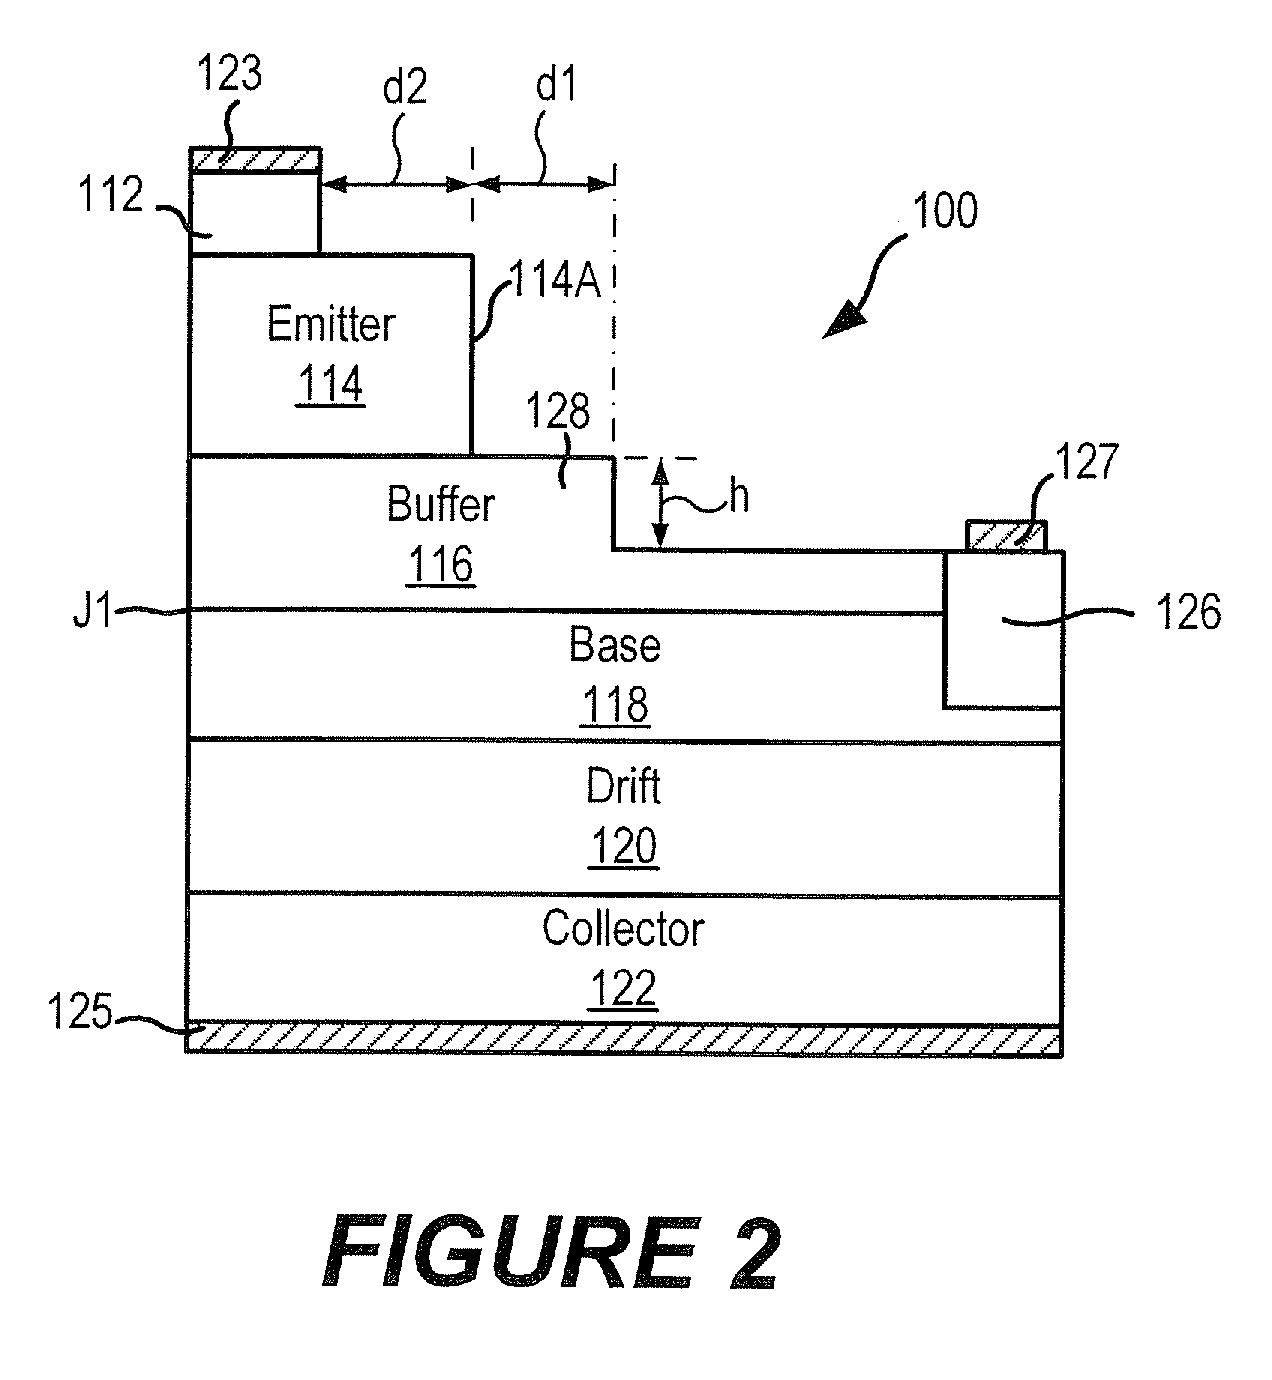 Power semiconductor devices with mesa structures and buffer layers including mesa steps